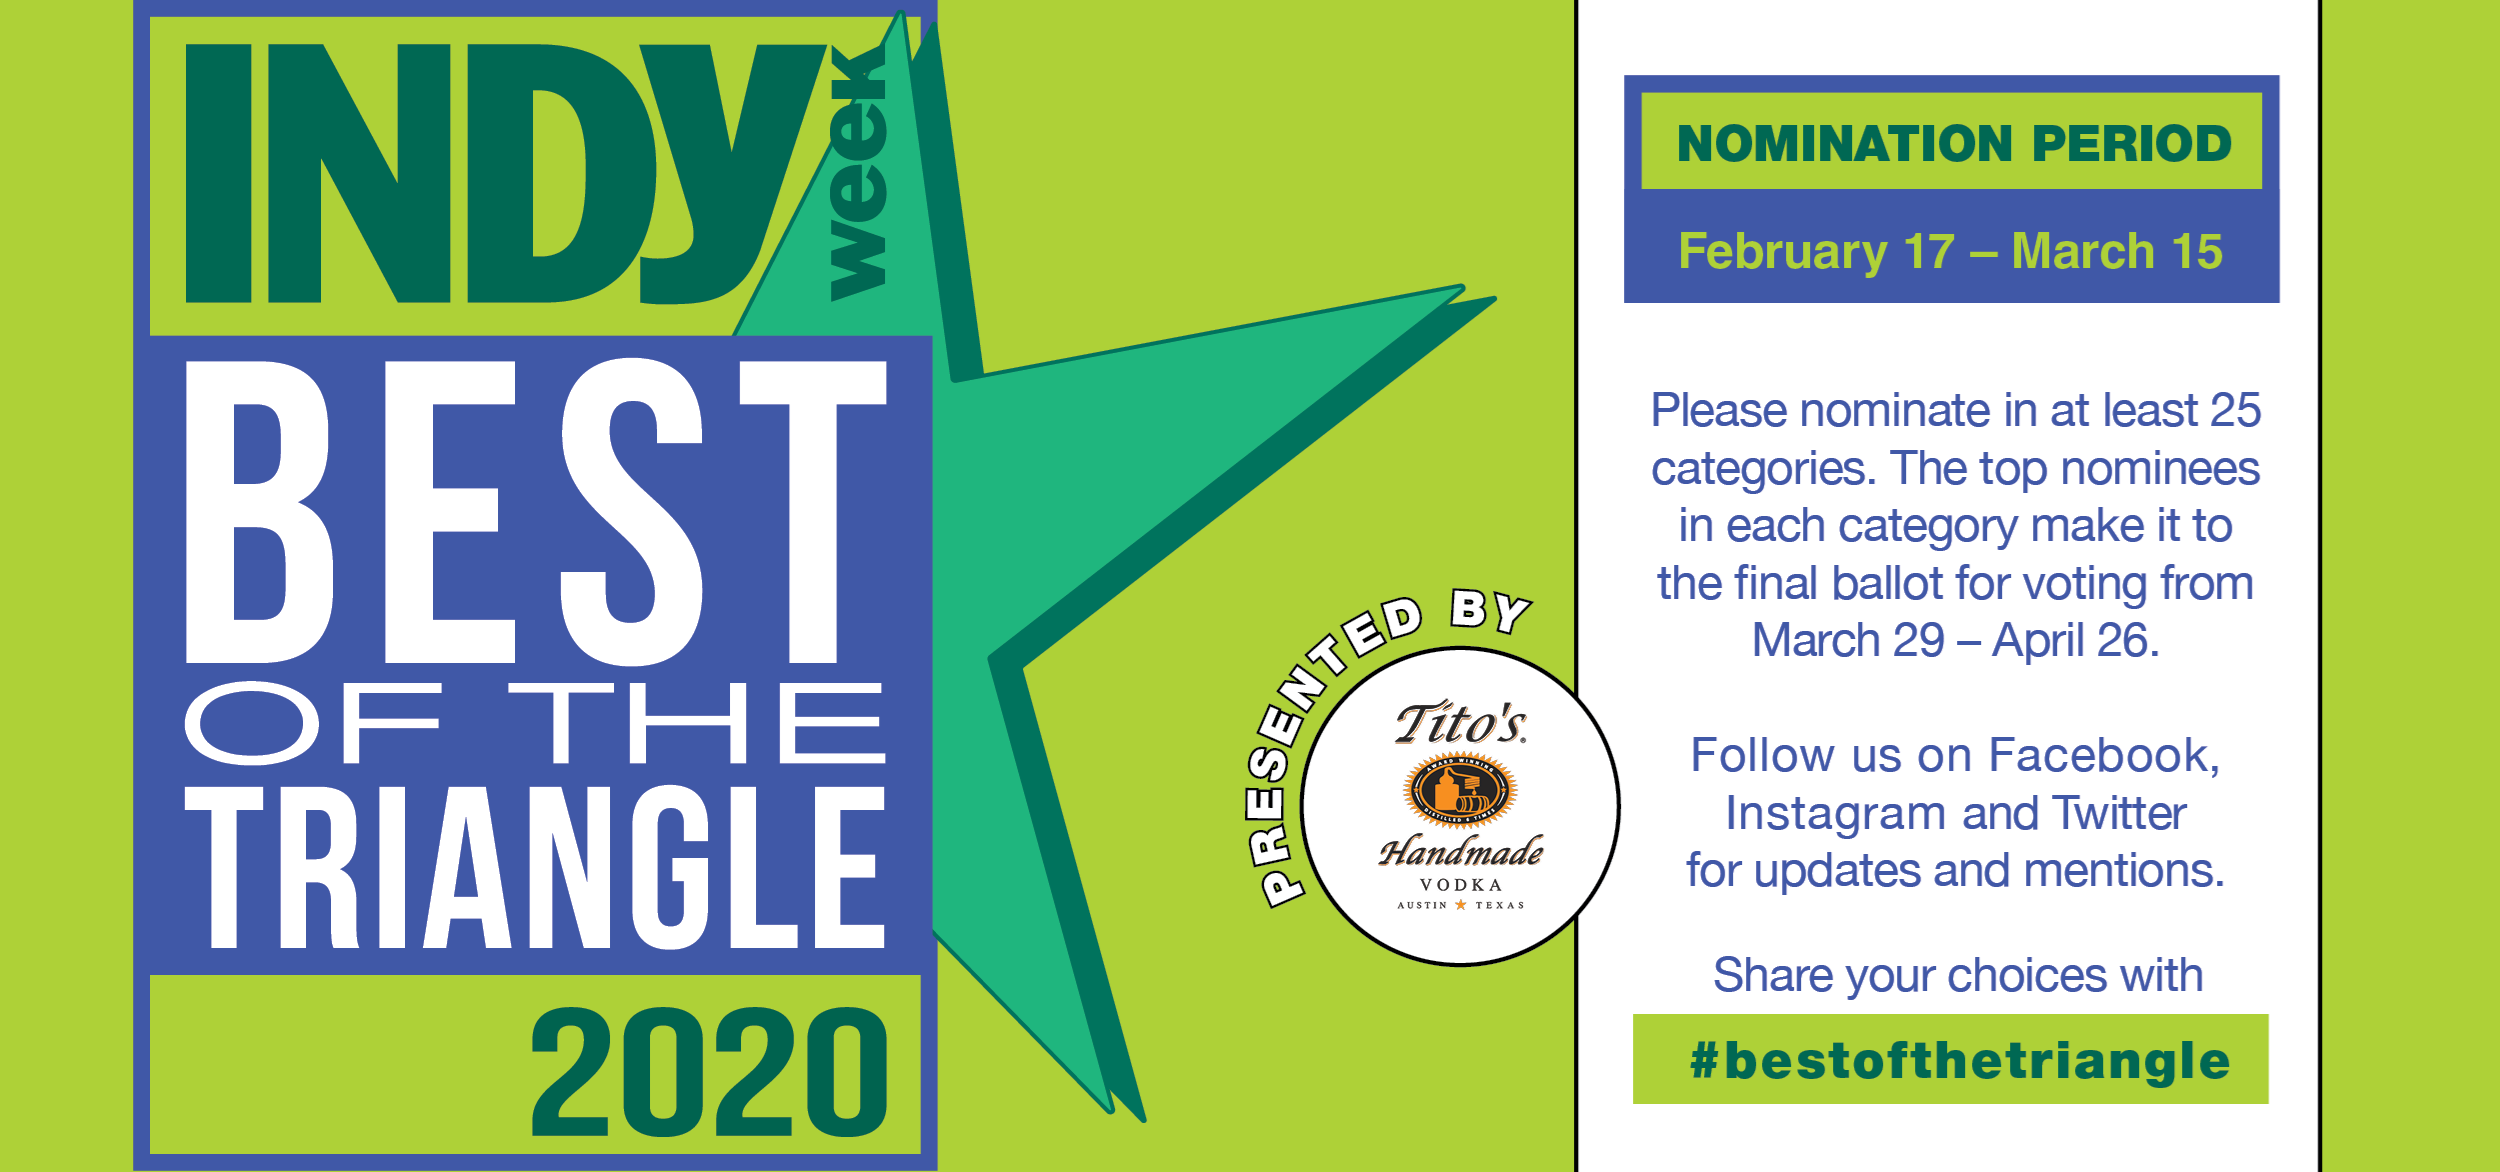 Nominate Smoothe in Indy Week Best of the Triangle 